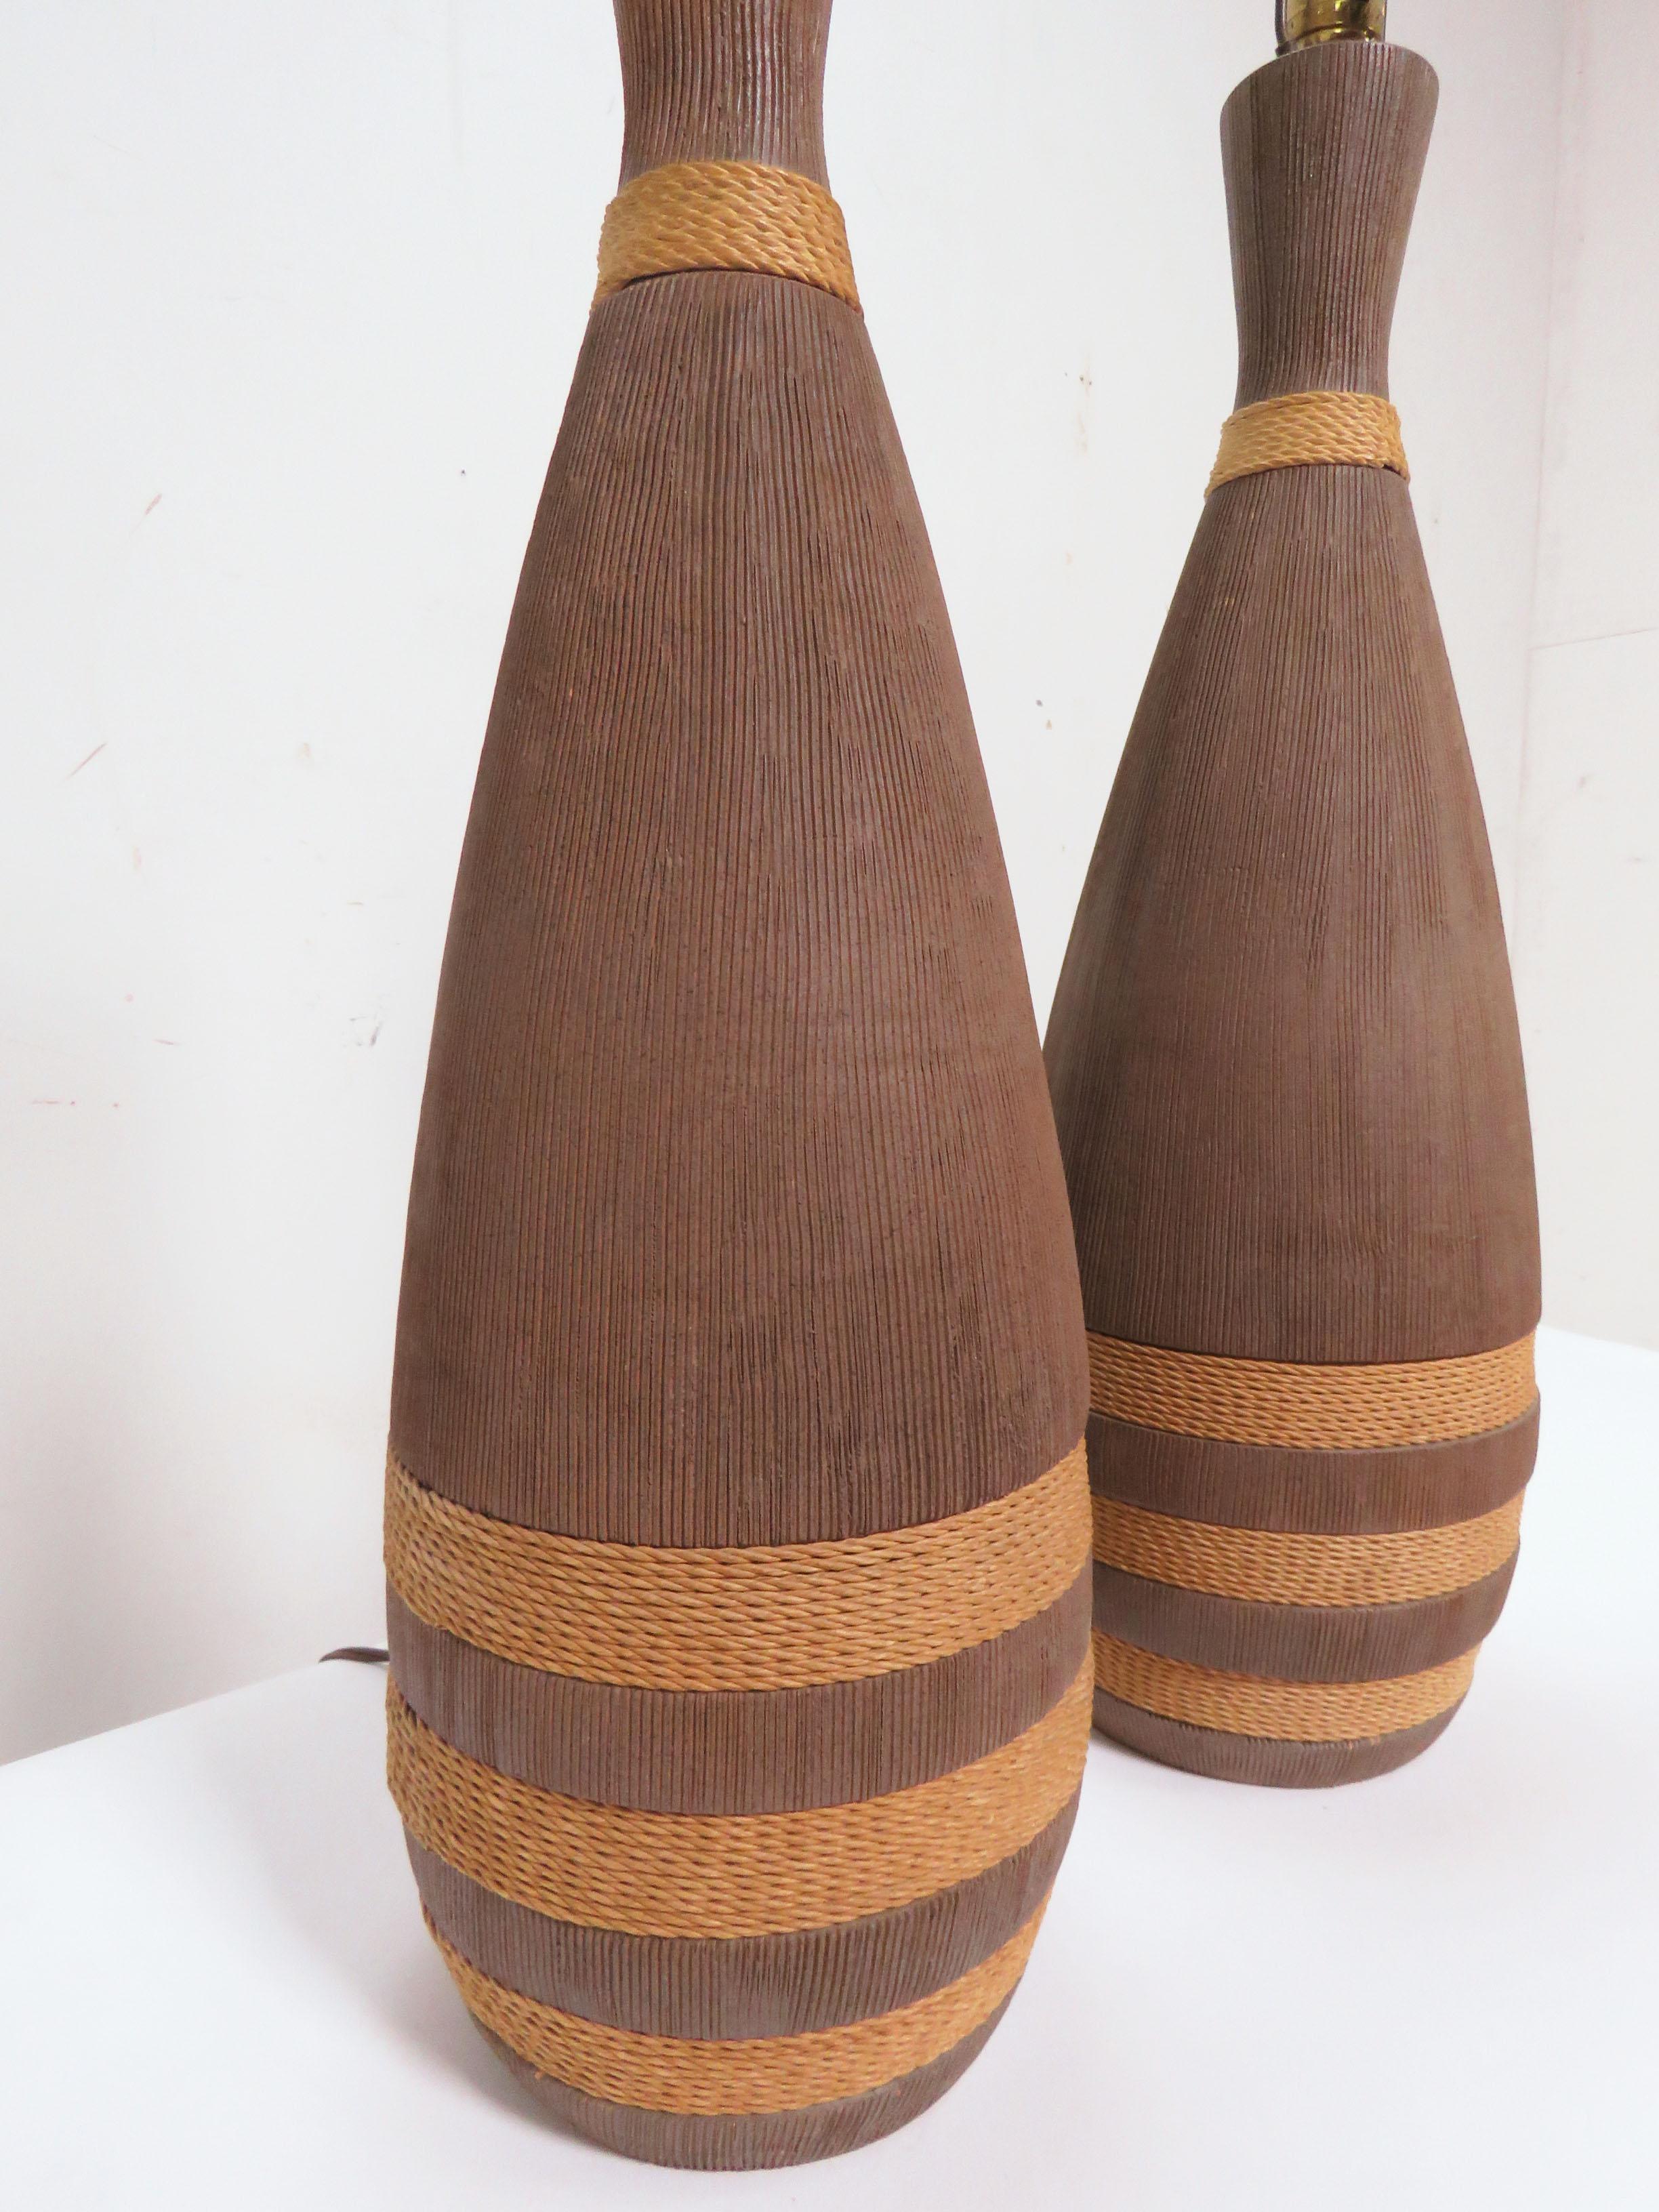 Italian Aldo Londi for Bitossi, Italy Pair of Table Lamps, circa 1960s For Sale